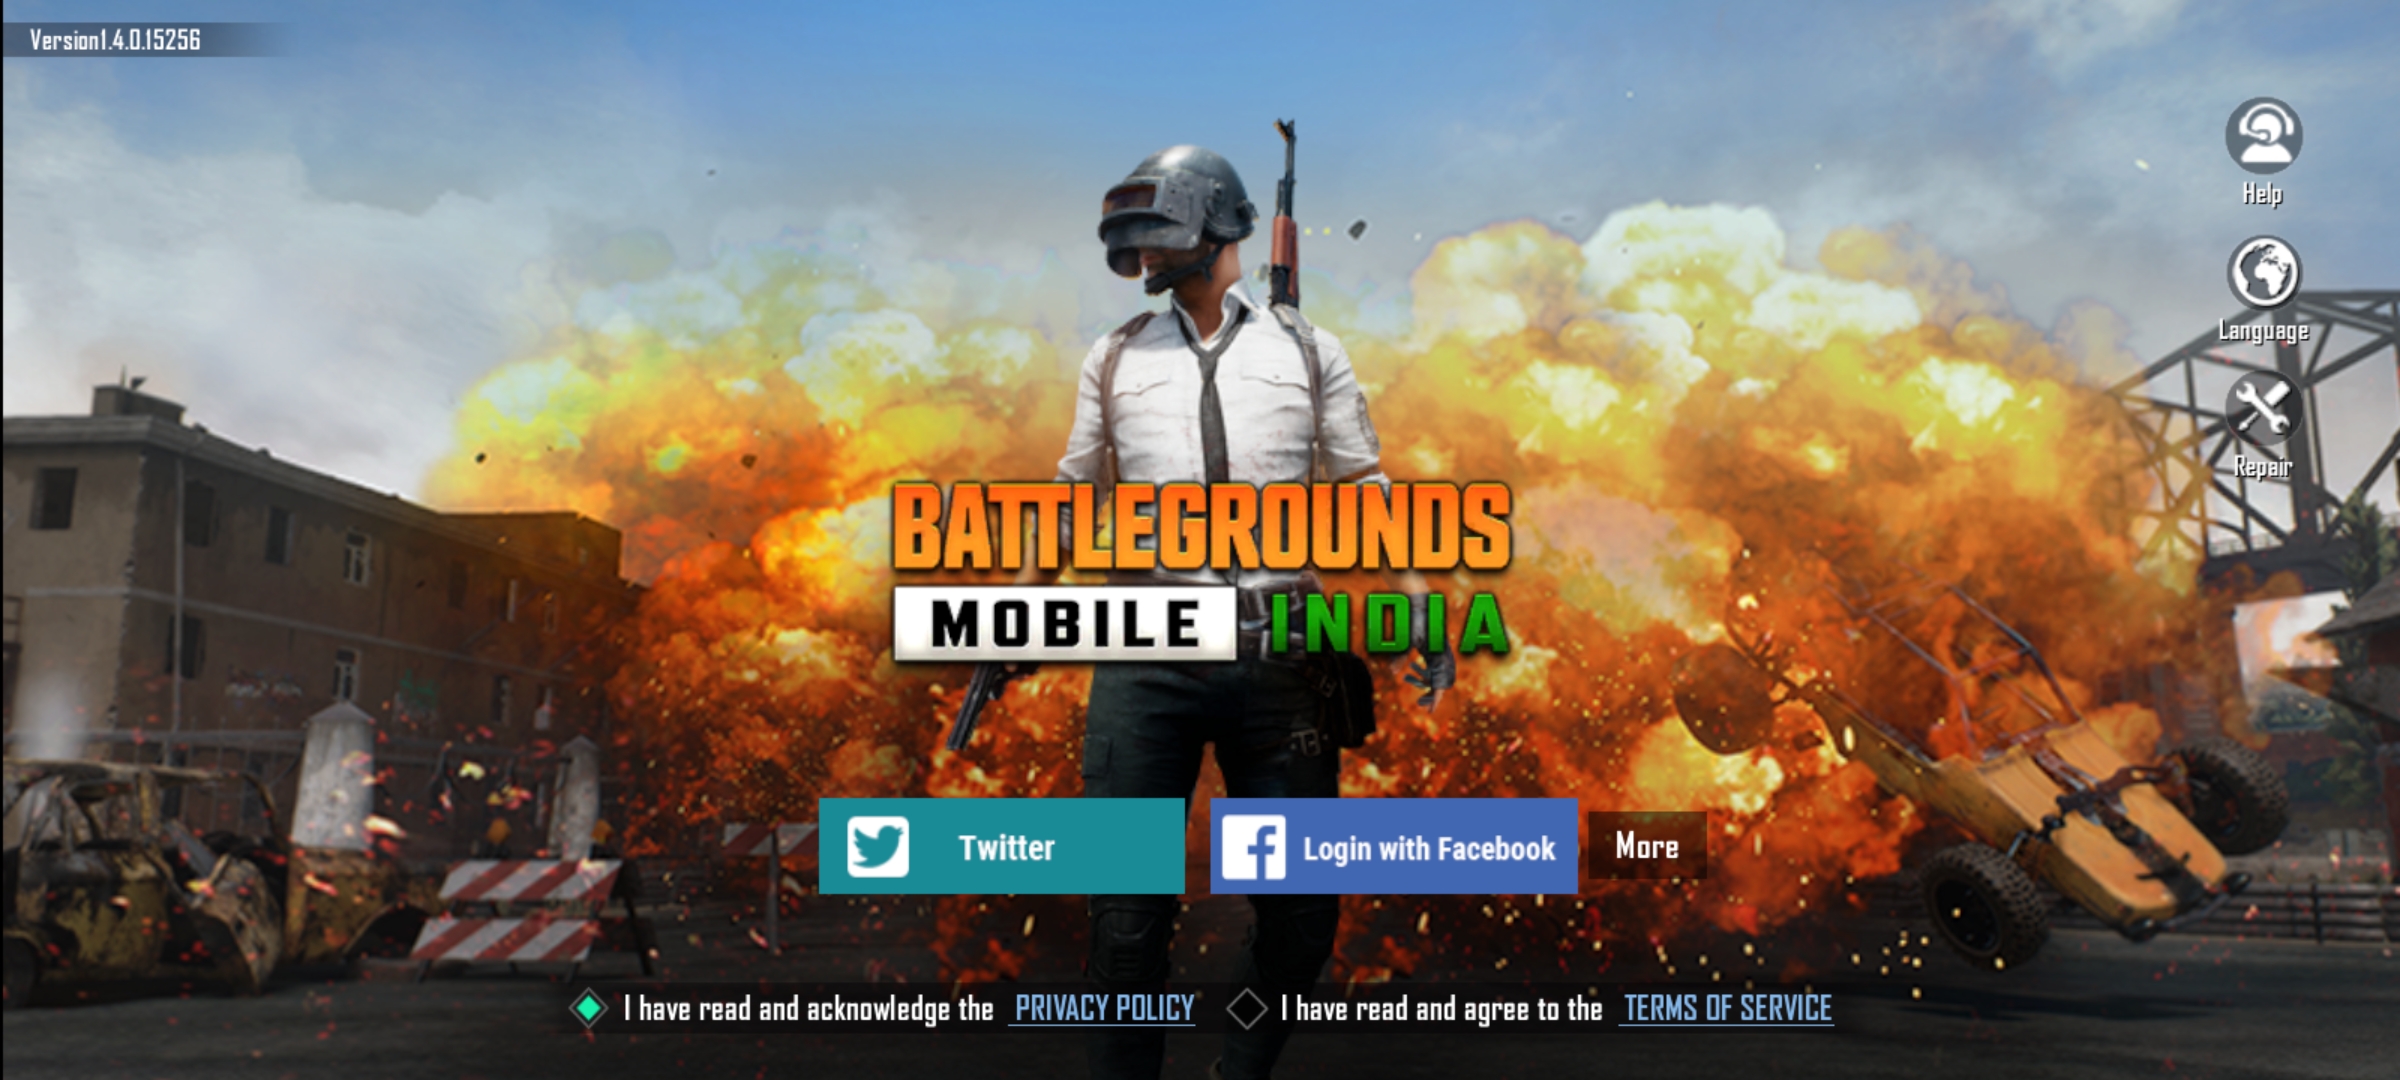 Battlegrounds Mobile India Apk And Obb Available Download Link And